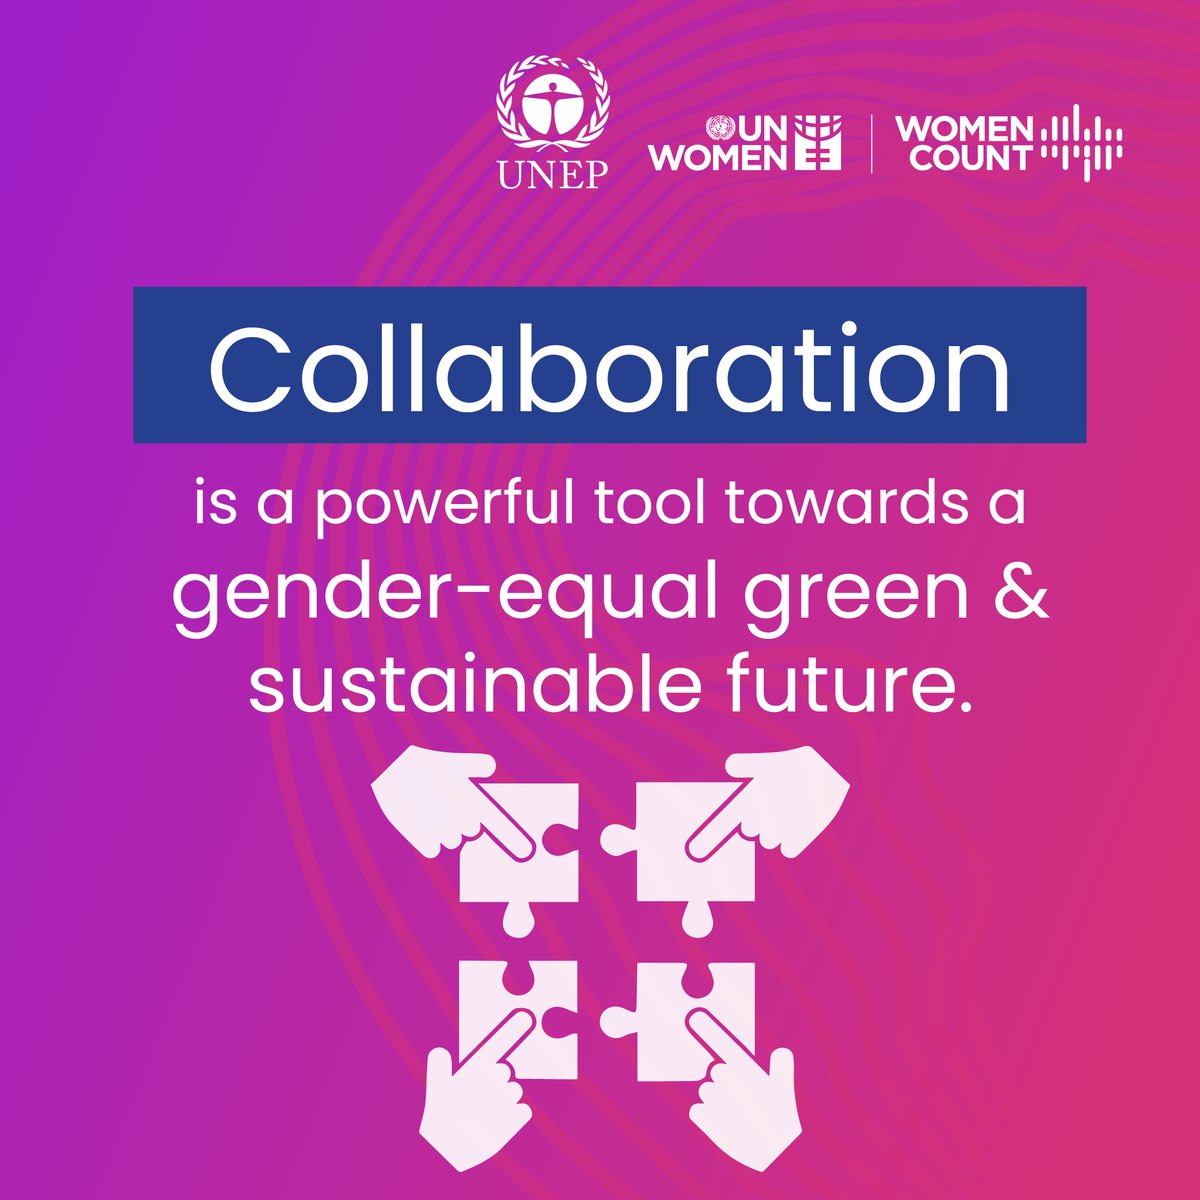 @UNEP @CGIARAfrica @AGNESAfrica1 @devinitorg @gender_ke @PlanWACA @UNHABITAT @WEDO_worldwide @unwomeneca @MSalimu Collaboration is a powerful tool towards a gender-equal green & sustainable future. The latest 55 Stories of Change w/@PlanGlobal launched at #CSW68 exemplifies this. It showcases innovations in #climatechange & #genderequality Learn more bit.ly/GenderEqualCli… #WomenCount